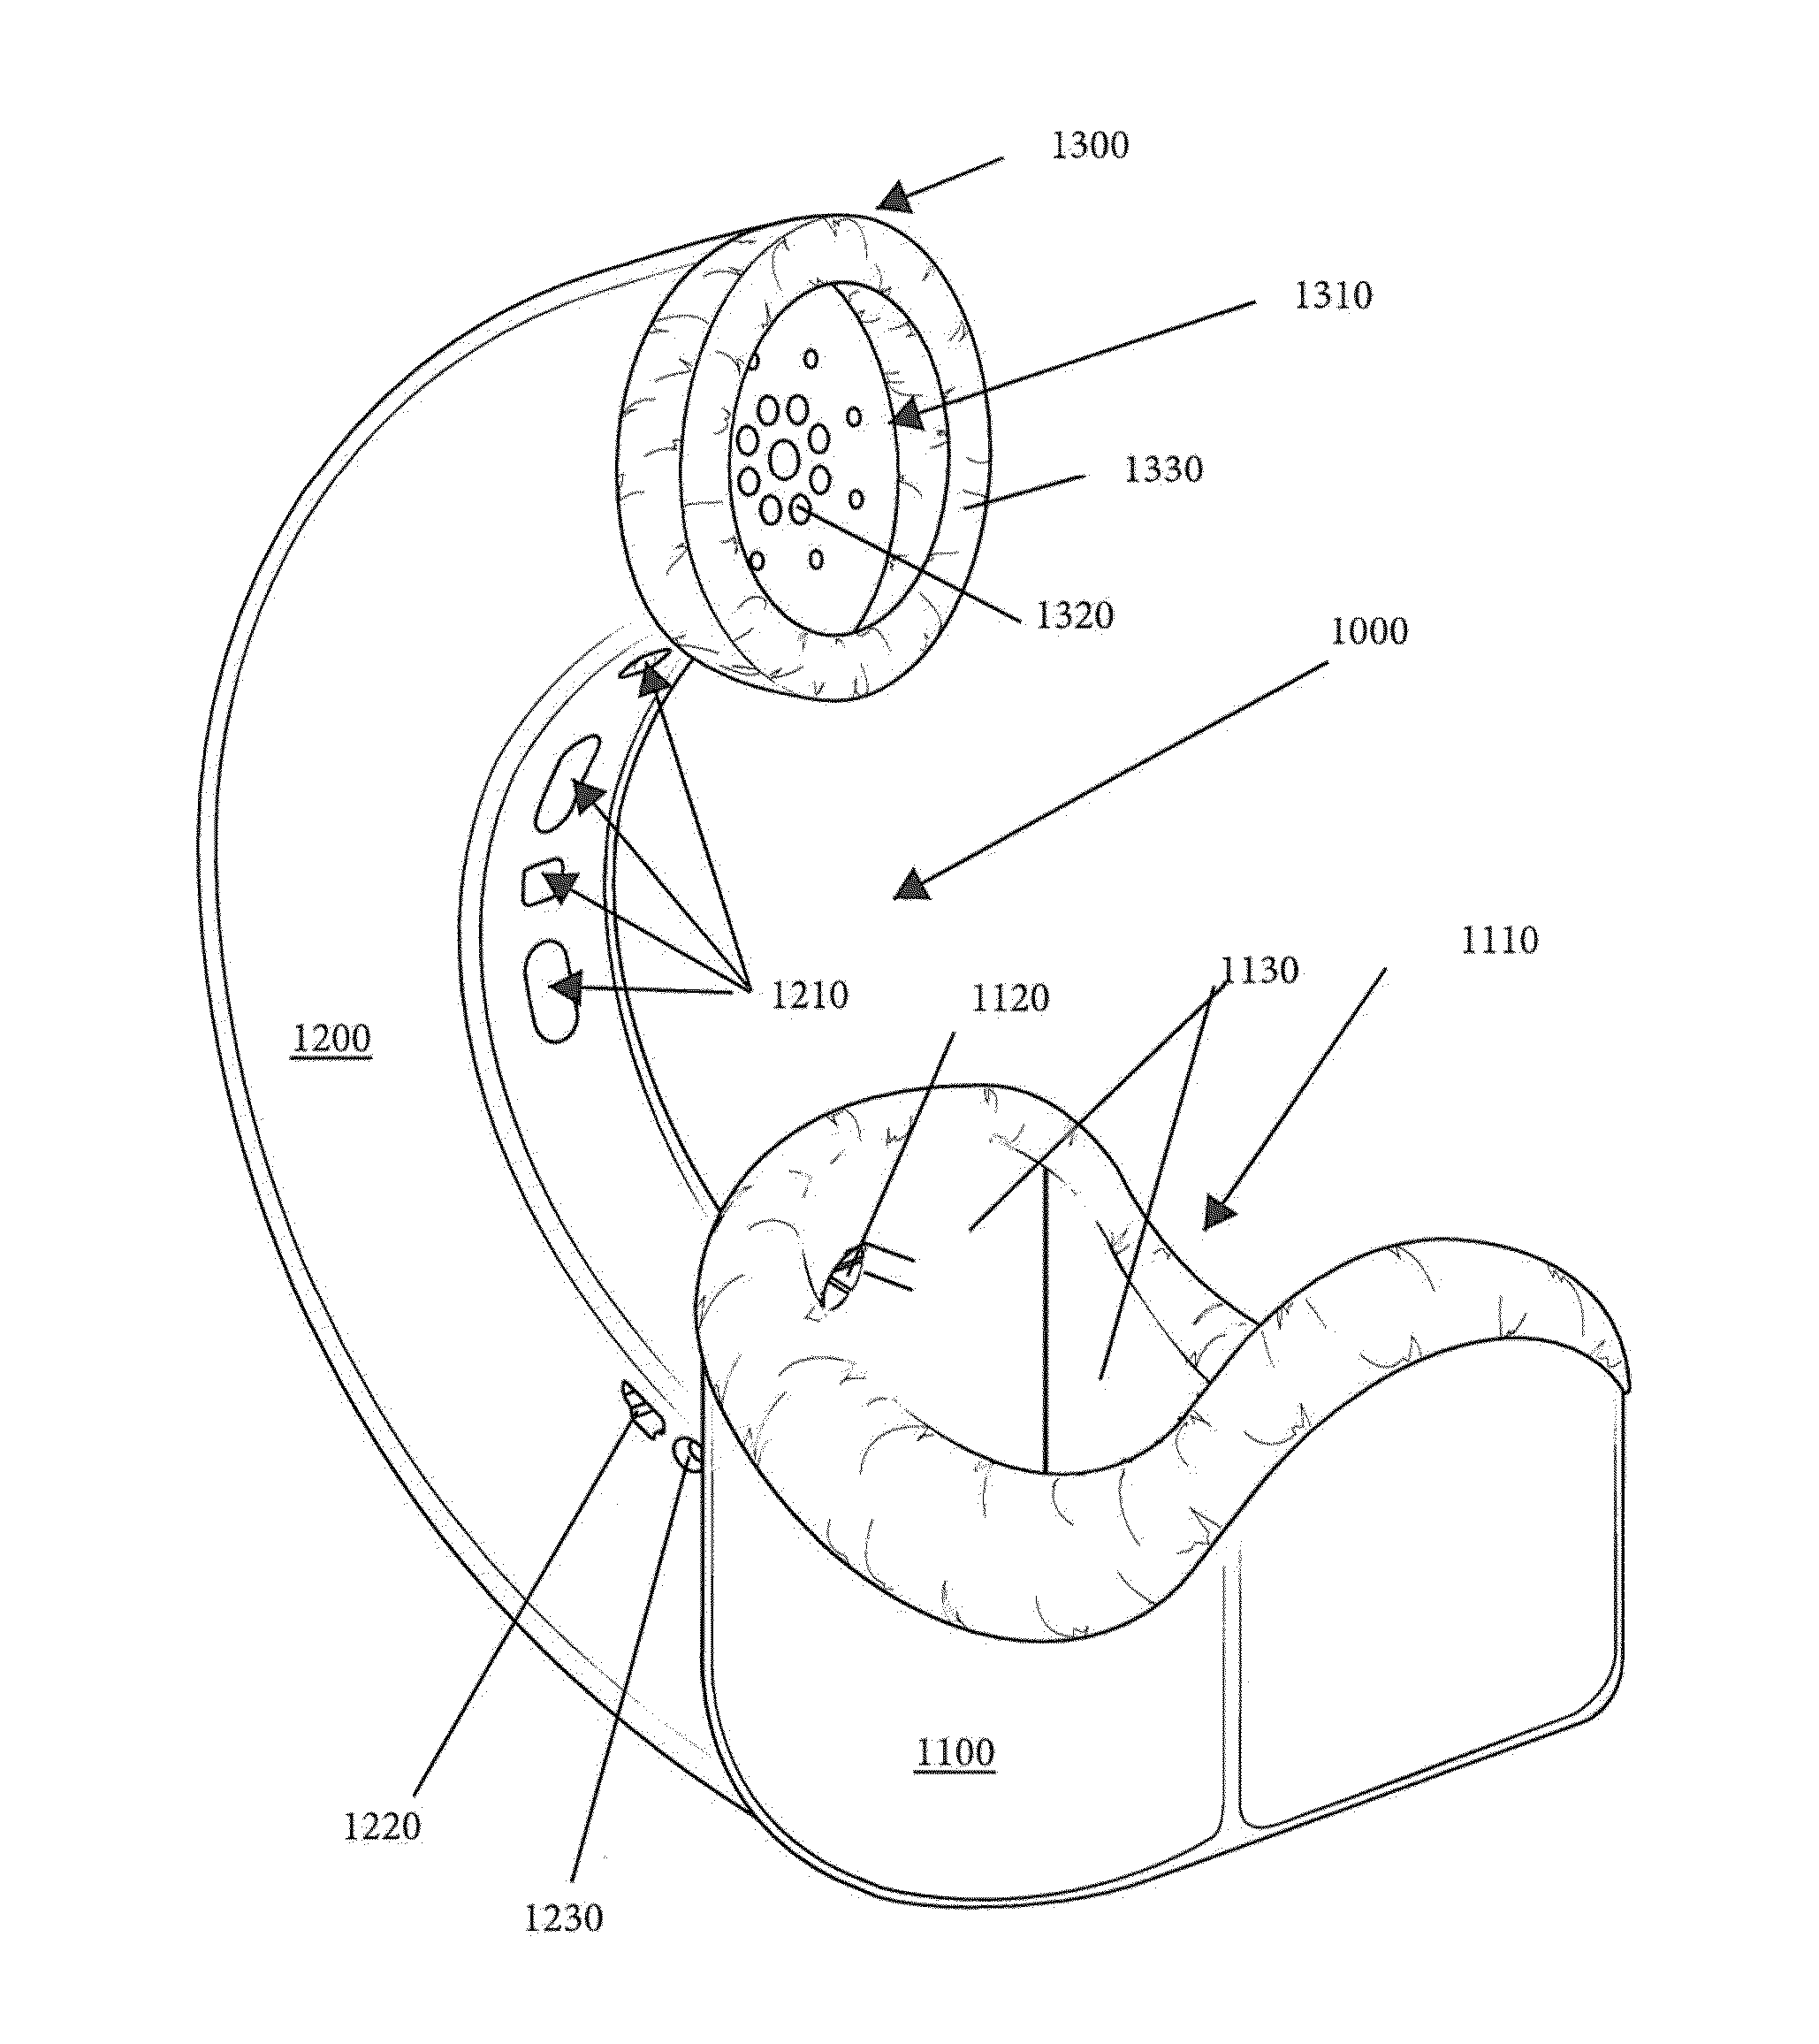 Ergonomic Tubular Anechoic Chambers for Use with a Communication Device and Related Methods